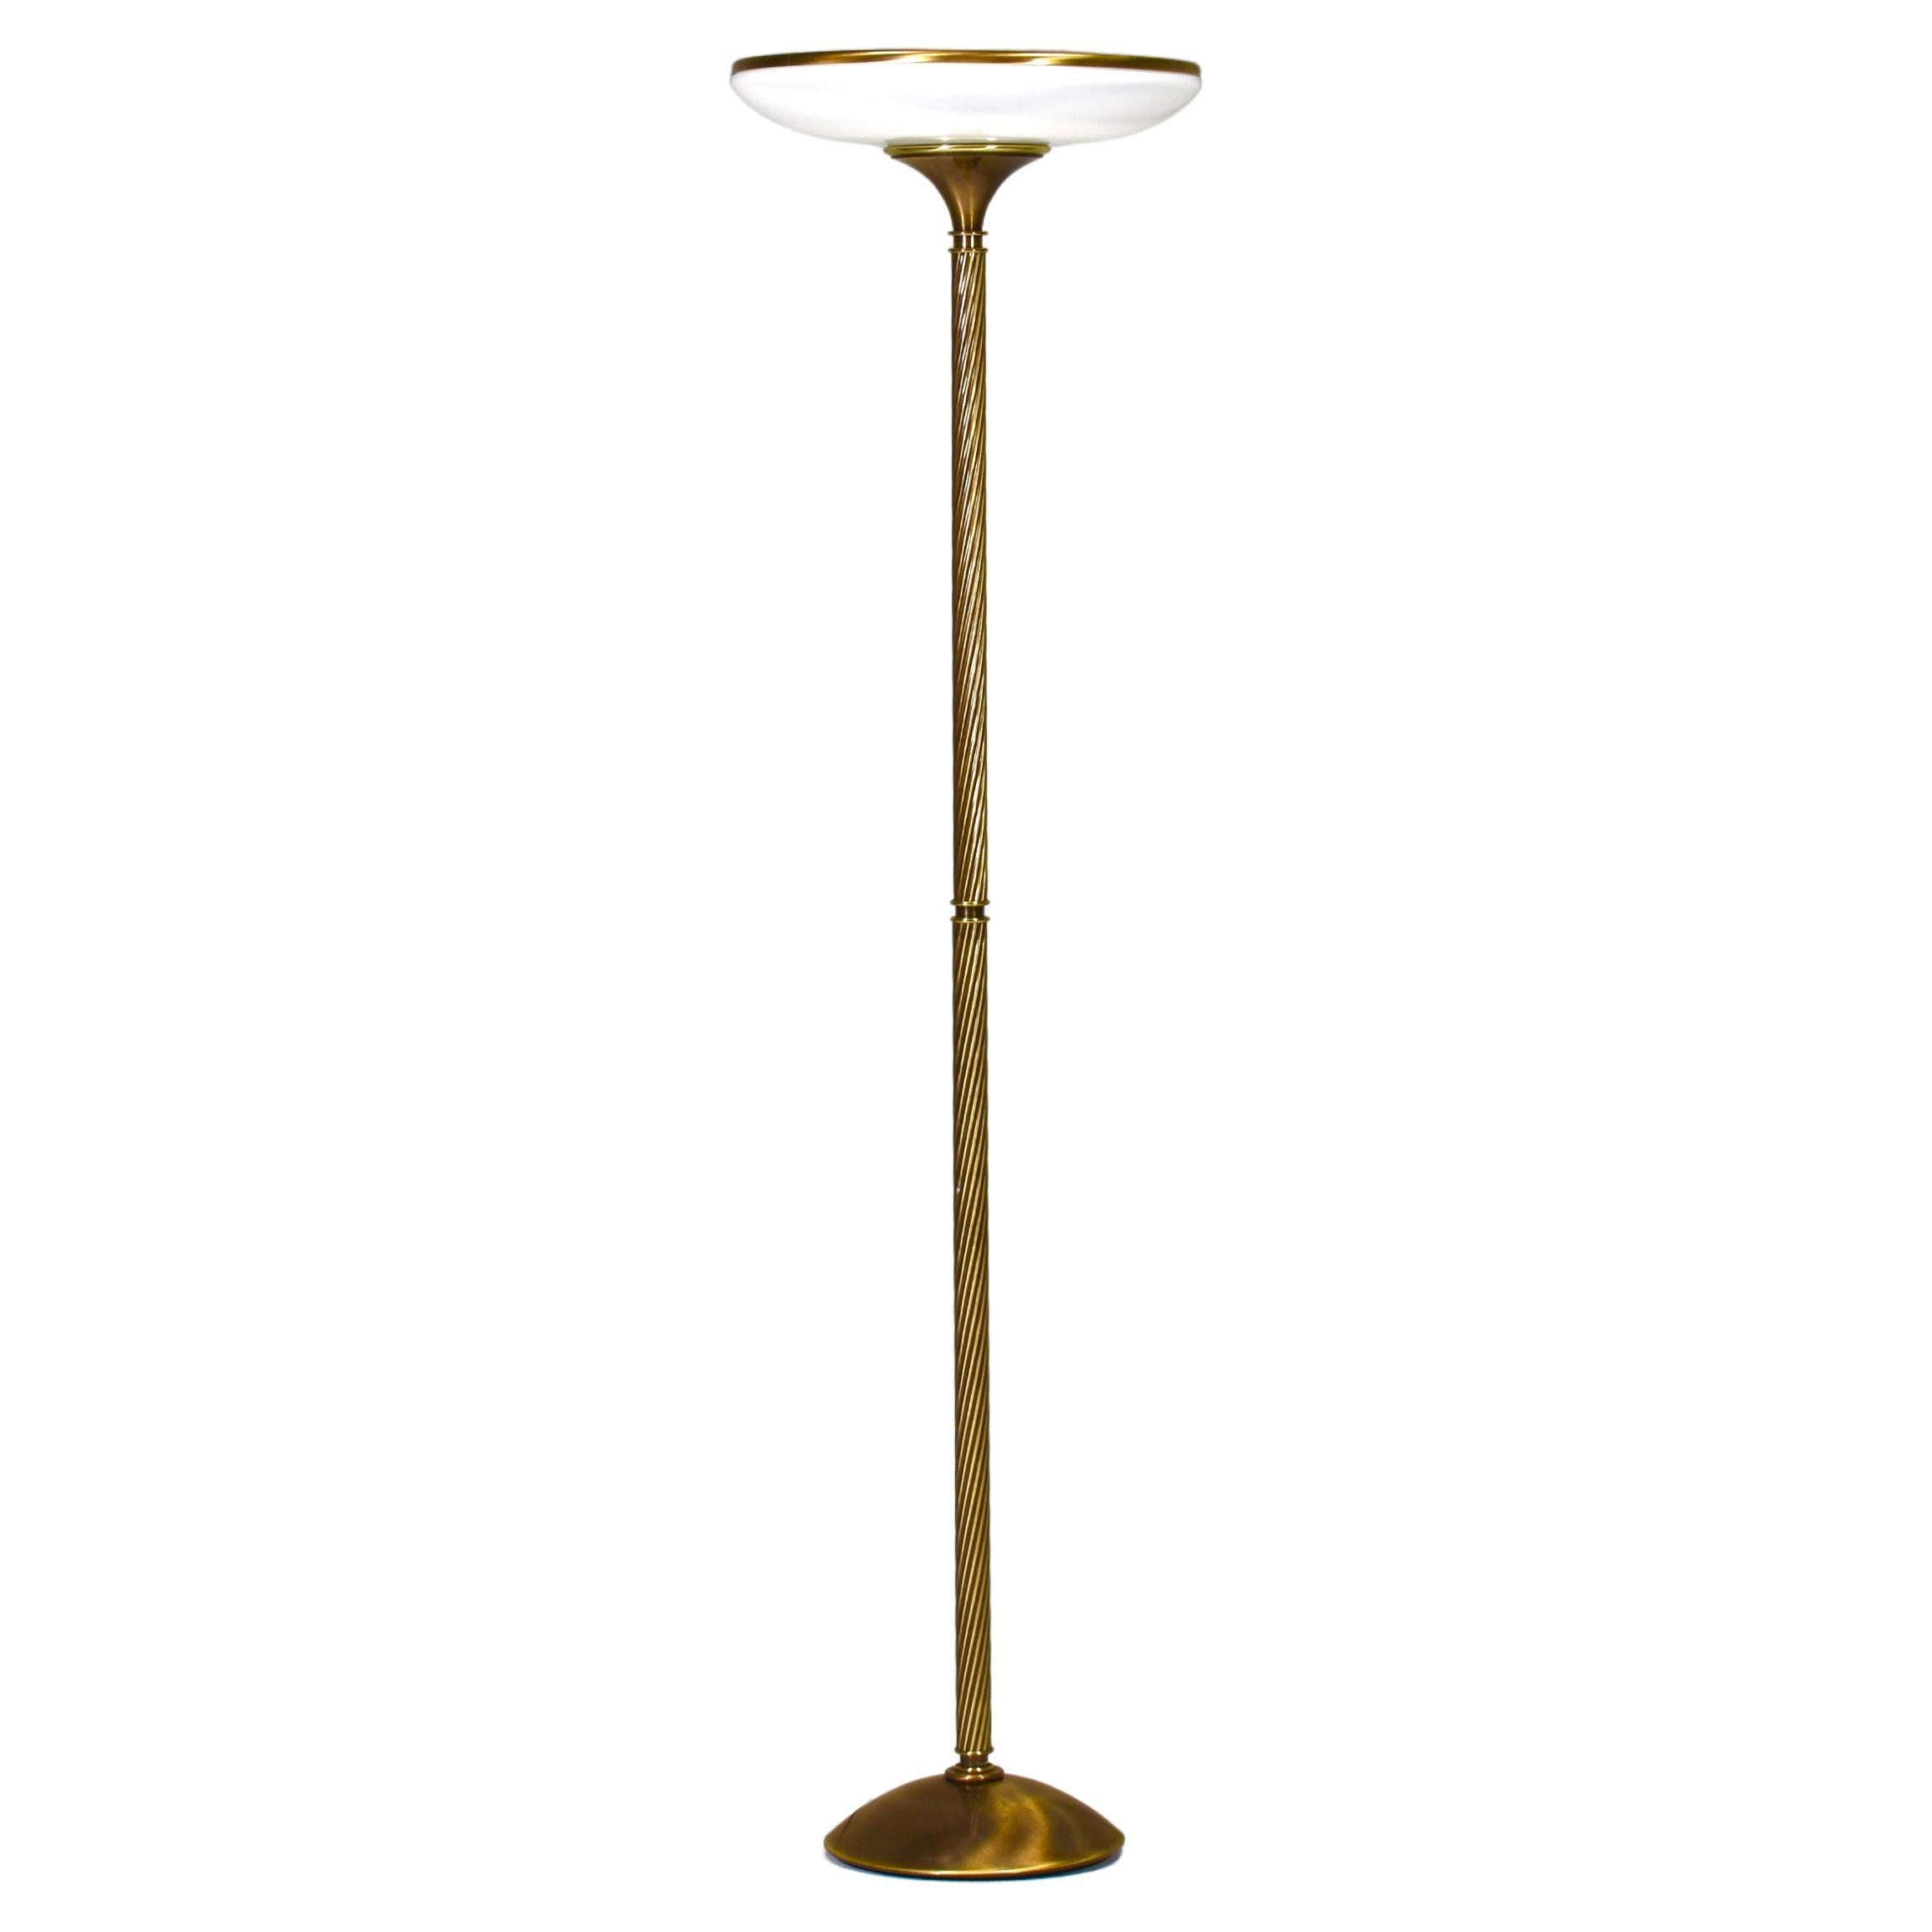 Relco Milano Turned Brass and Opaline Glass Floor Lamp, Italy - circa 1970